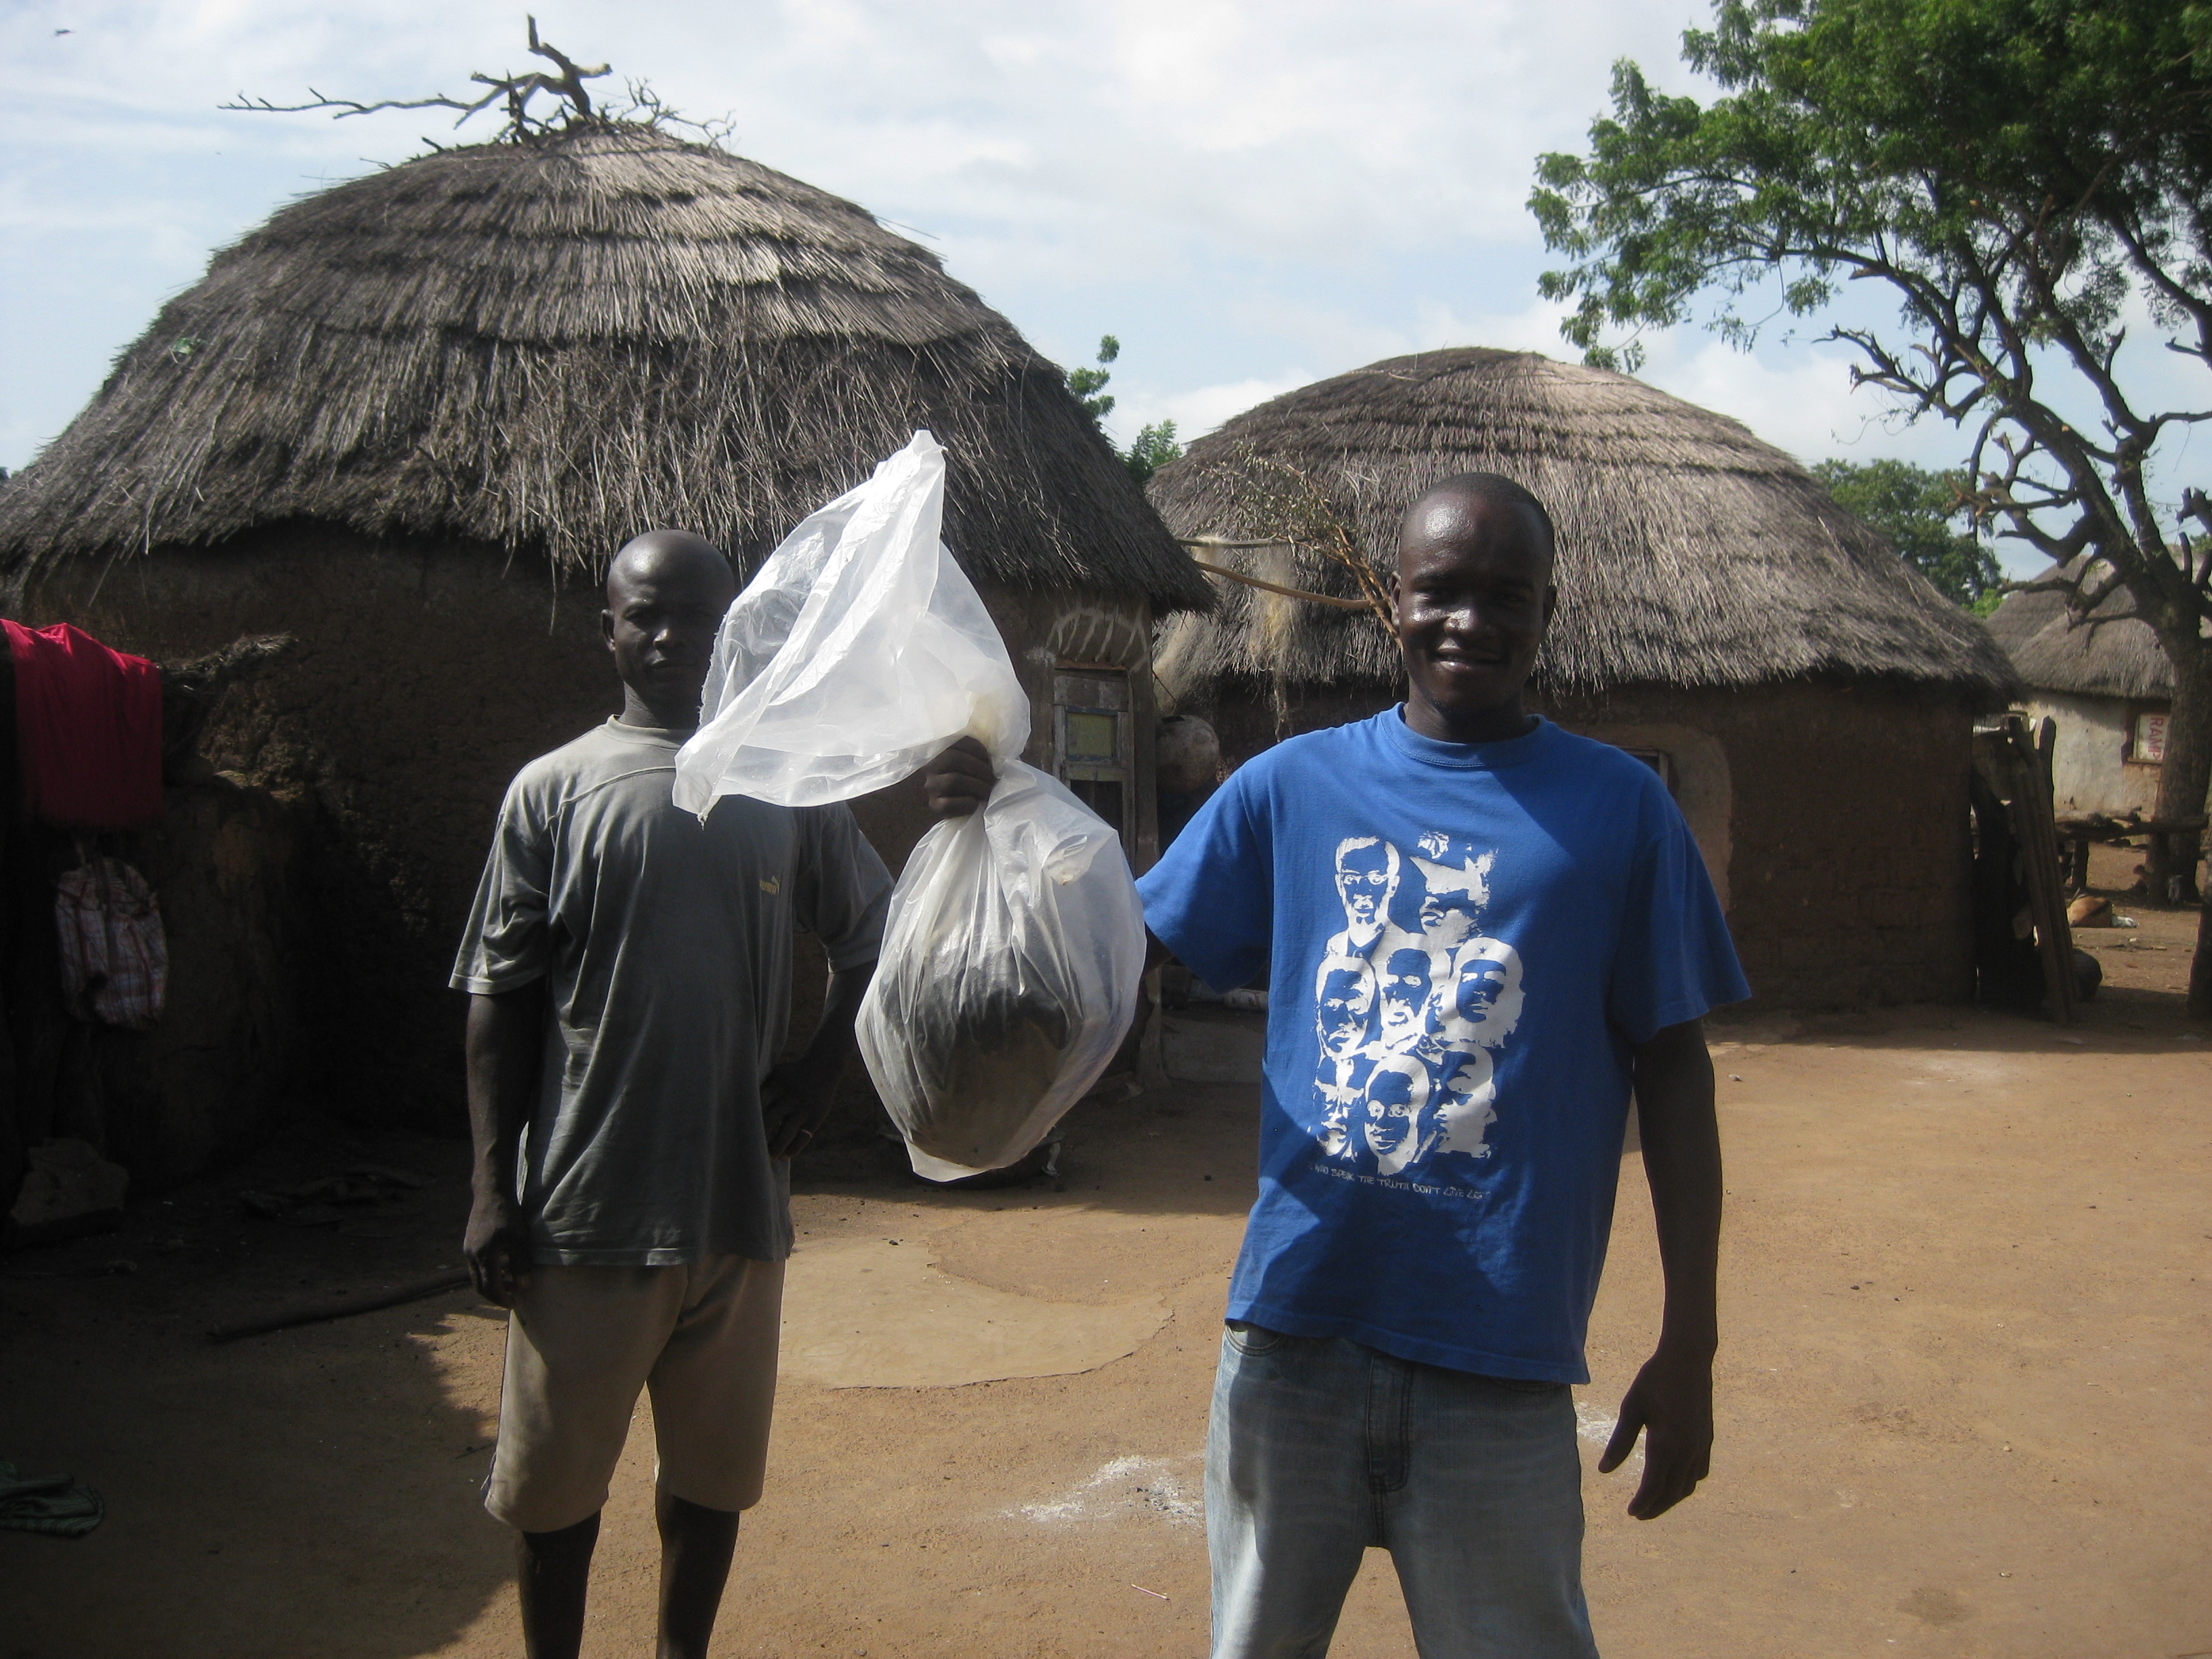 Peter taking home a gift from Hawa (one of the women who work at the Nymaliga water treatment center) and her family - a big bag of groundnuts (peanuts!)